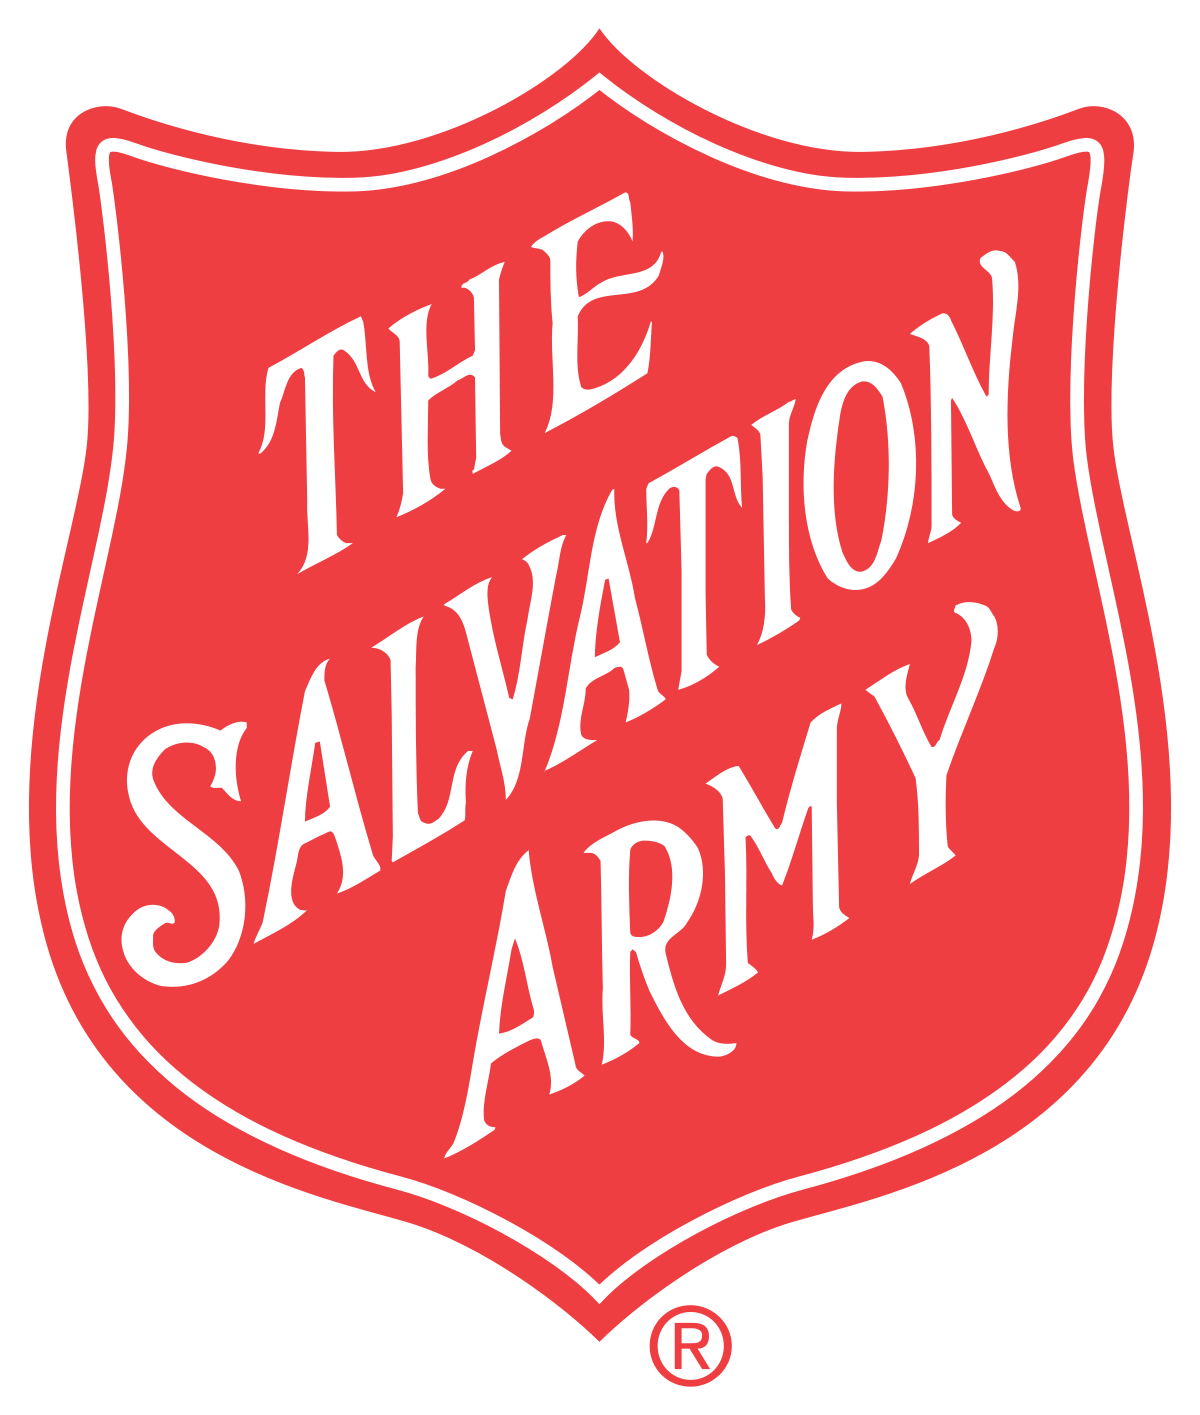 Salvation Army Shield Logo - The Salvation Army